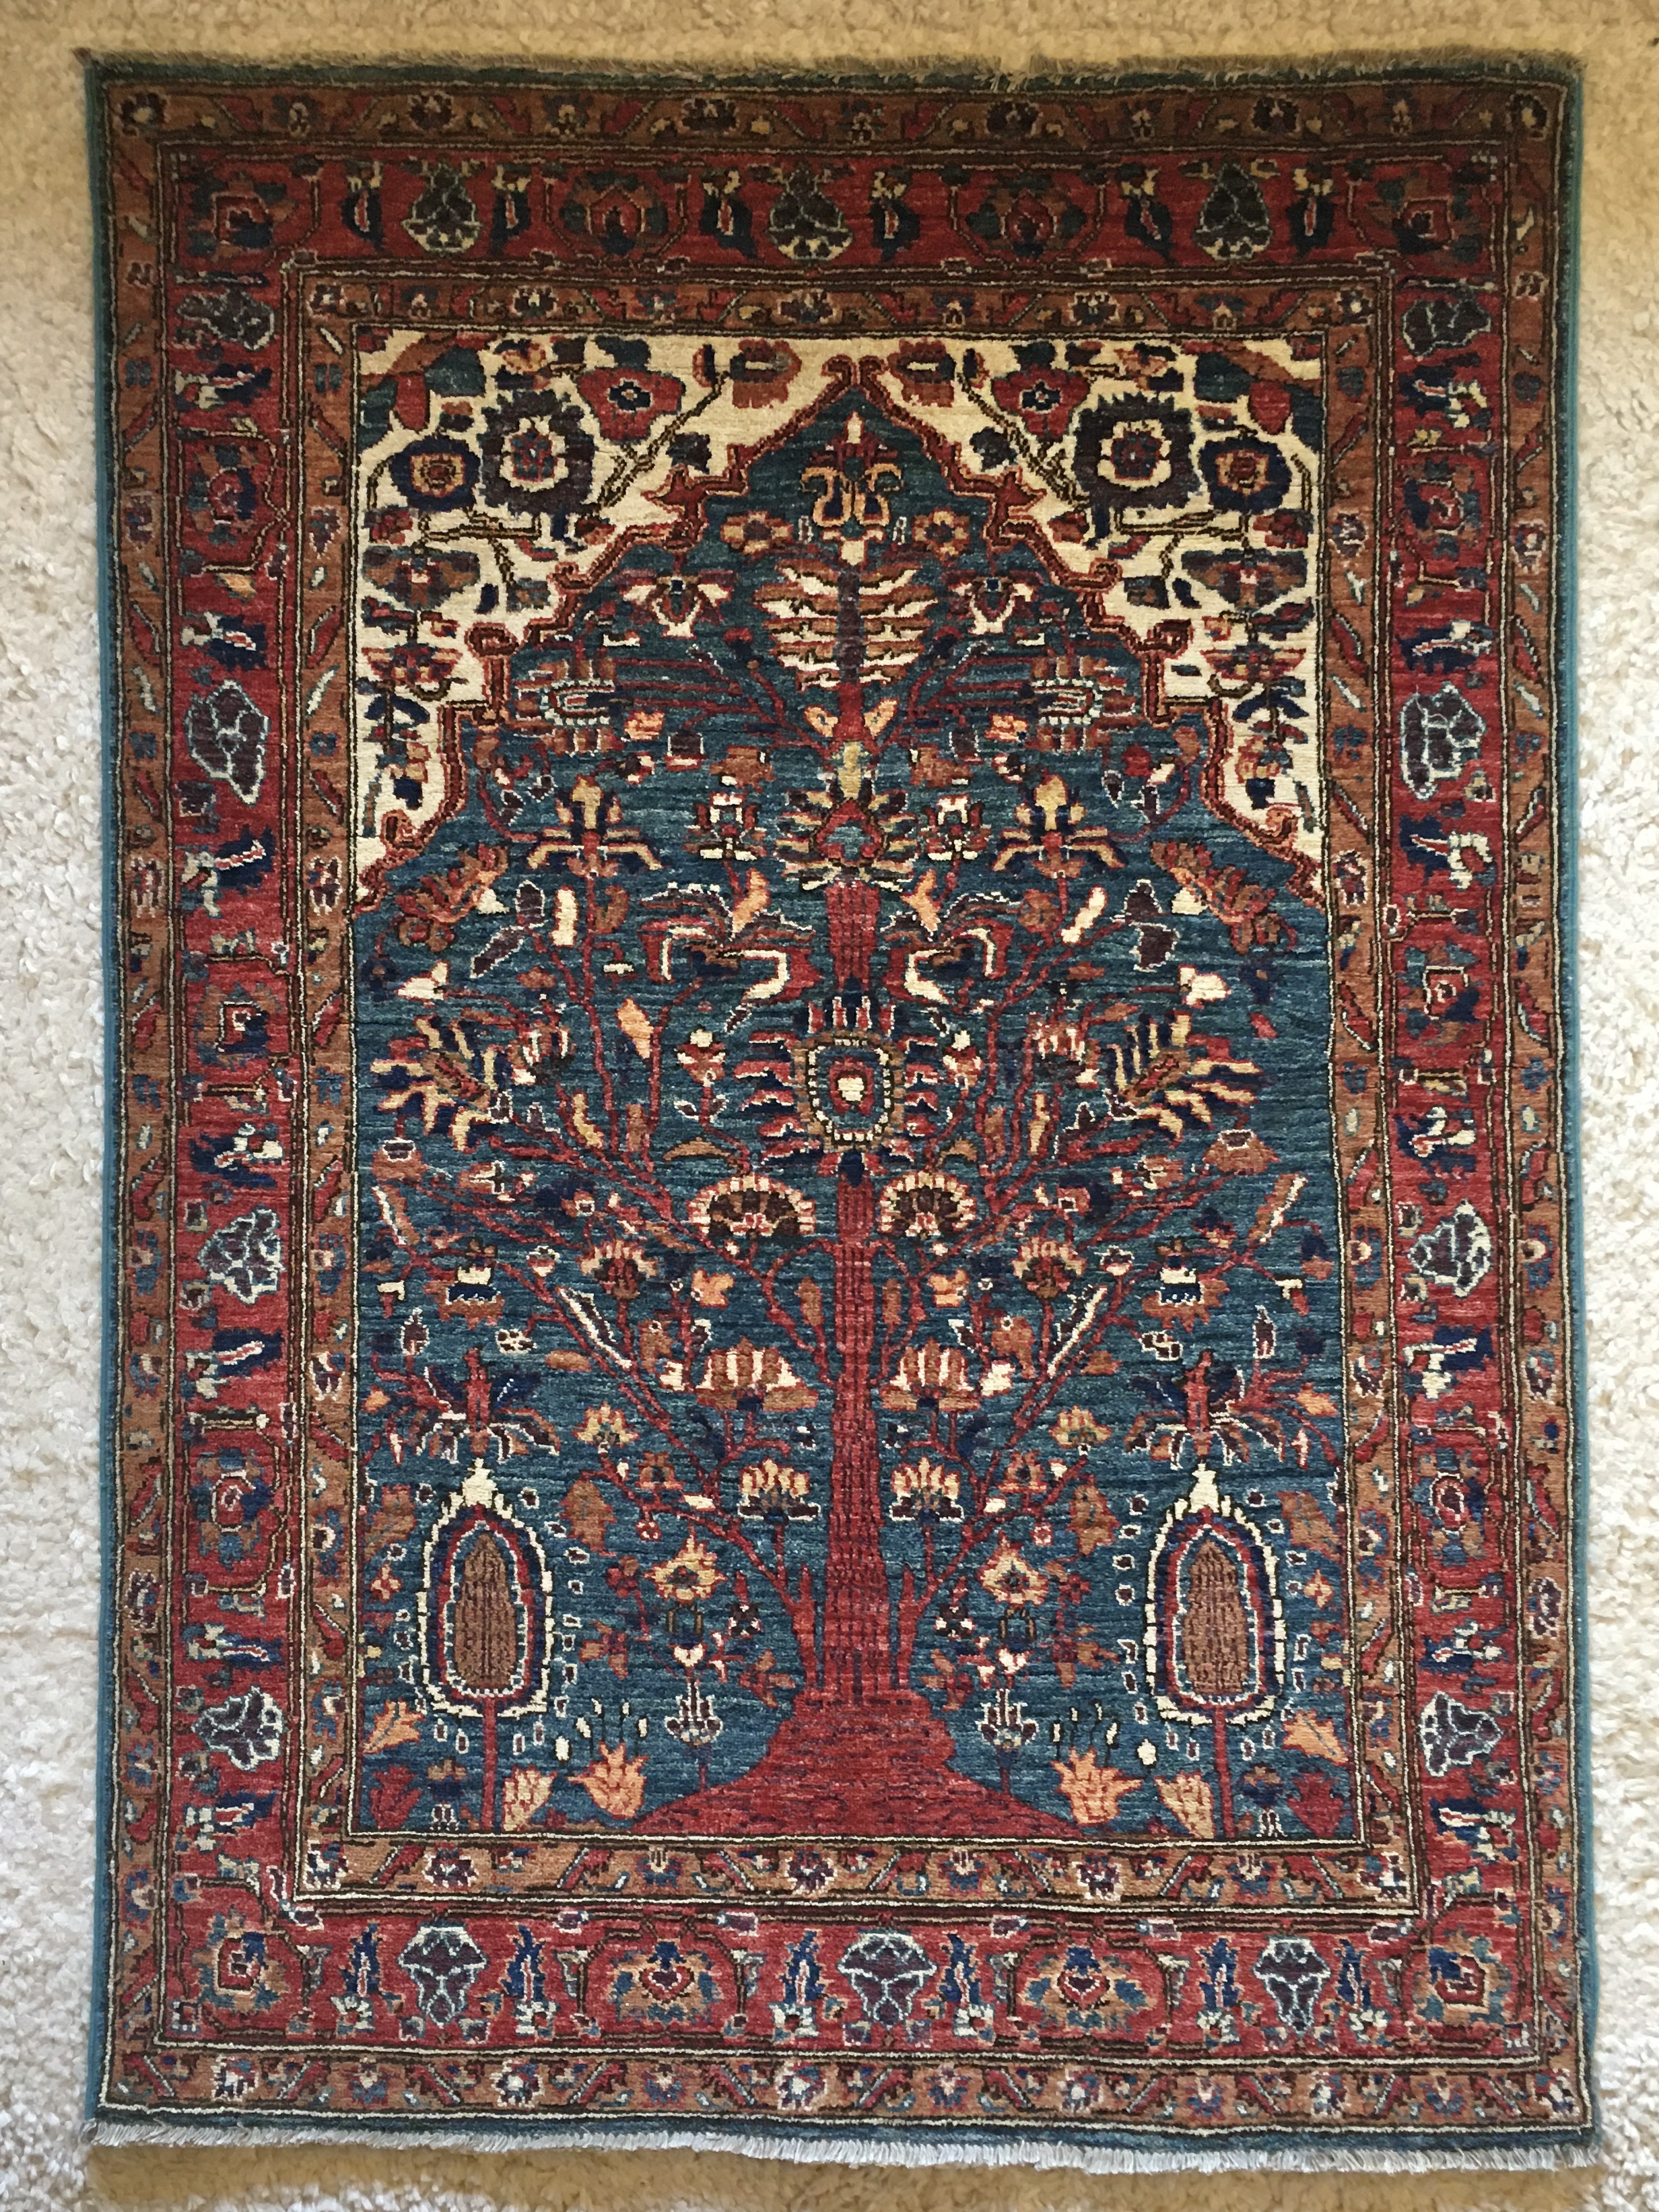 A prayer rug with an intricate tree featured in the middle